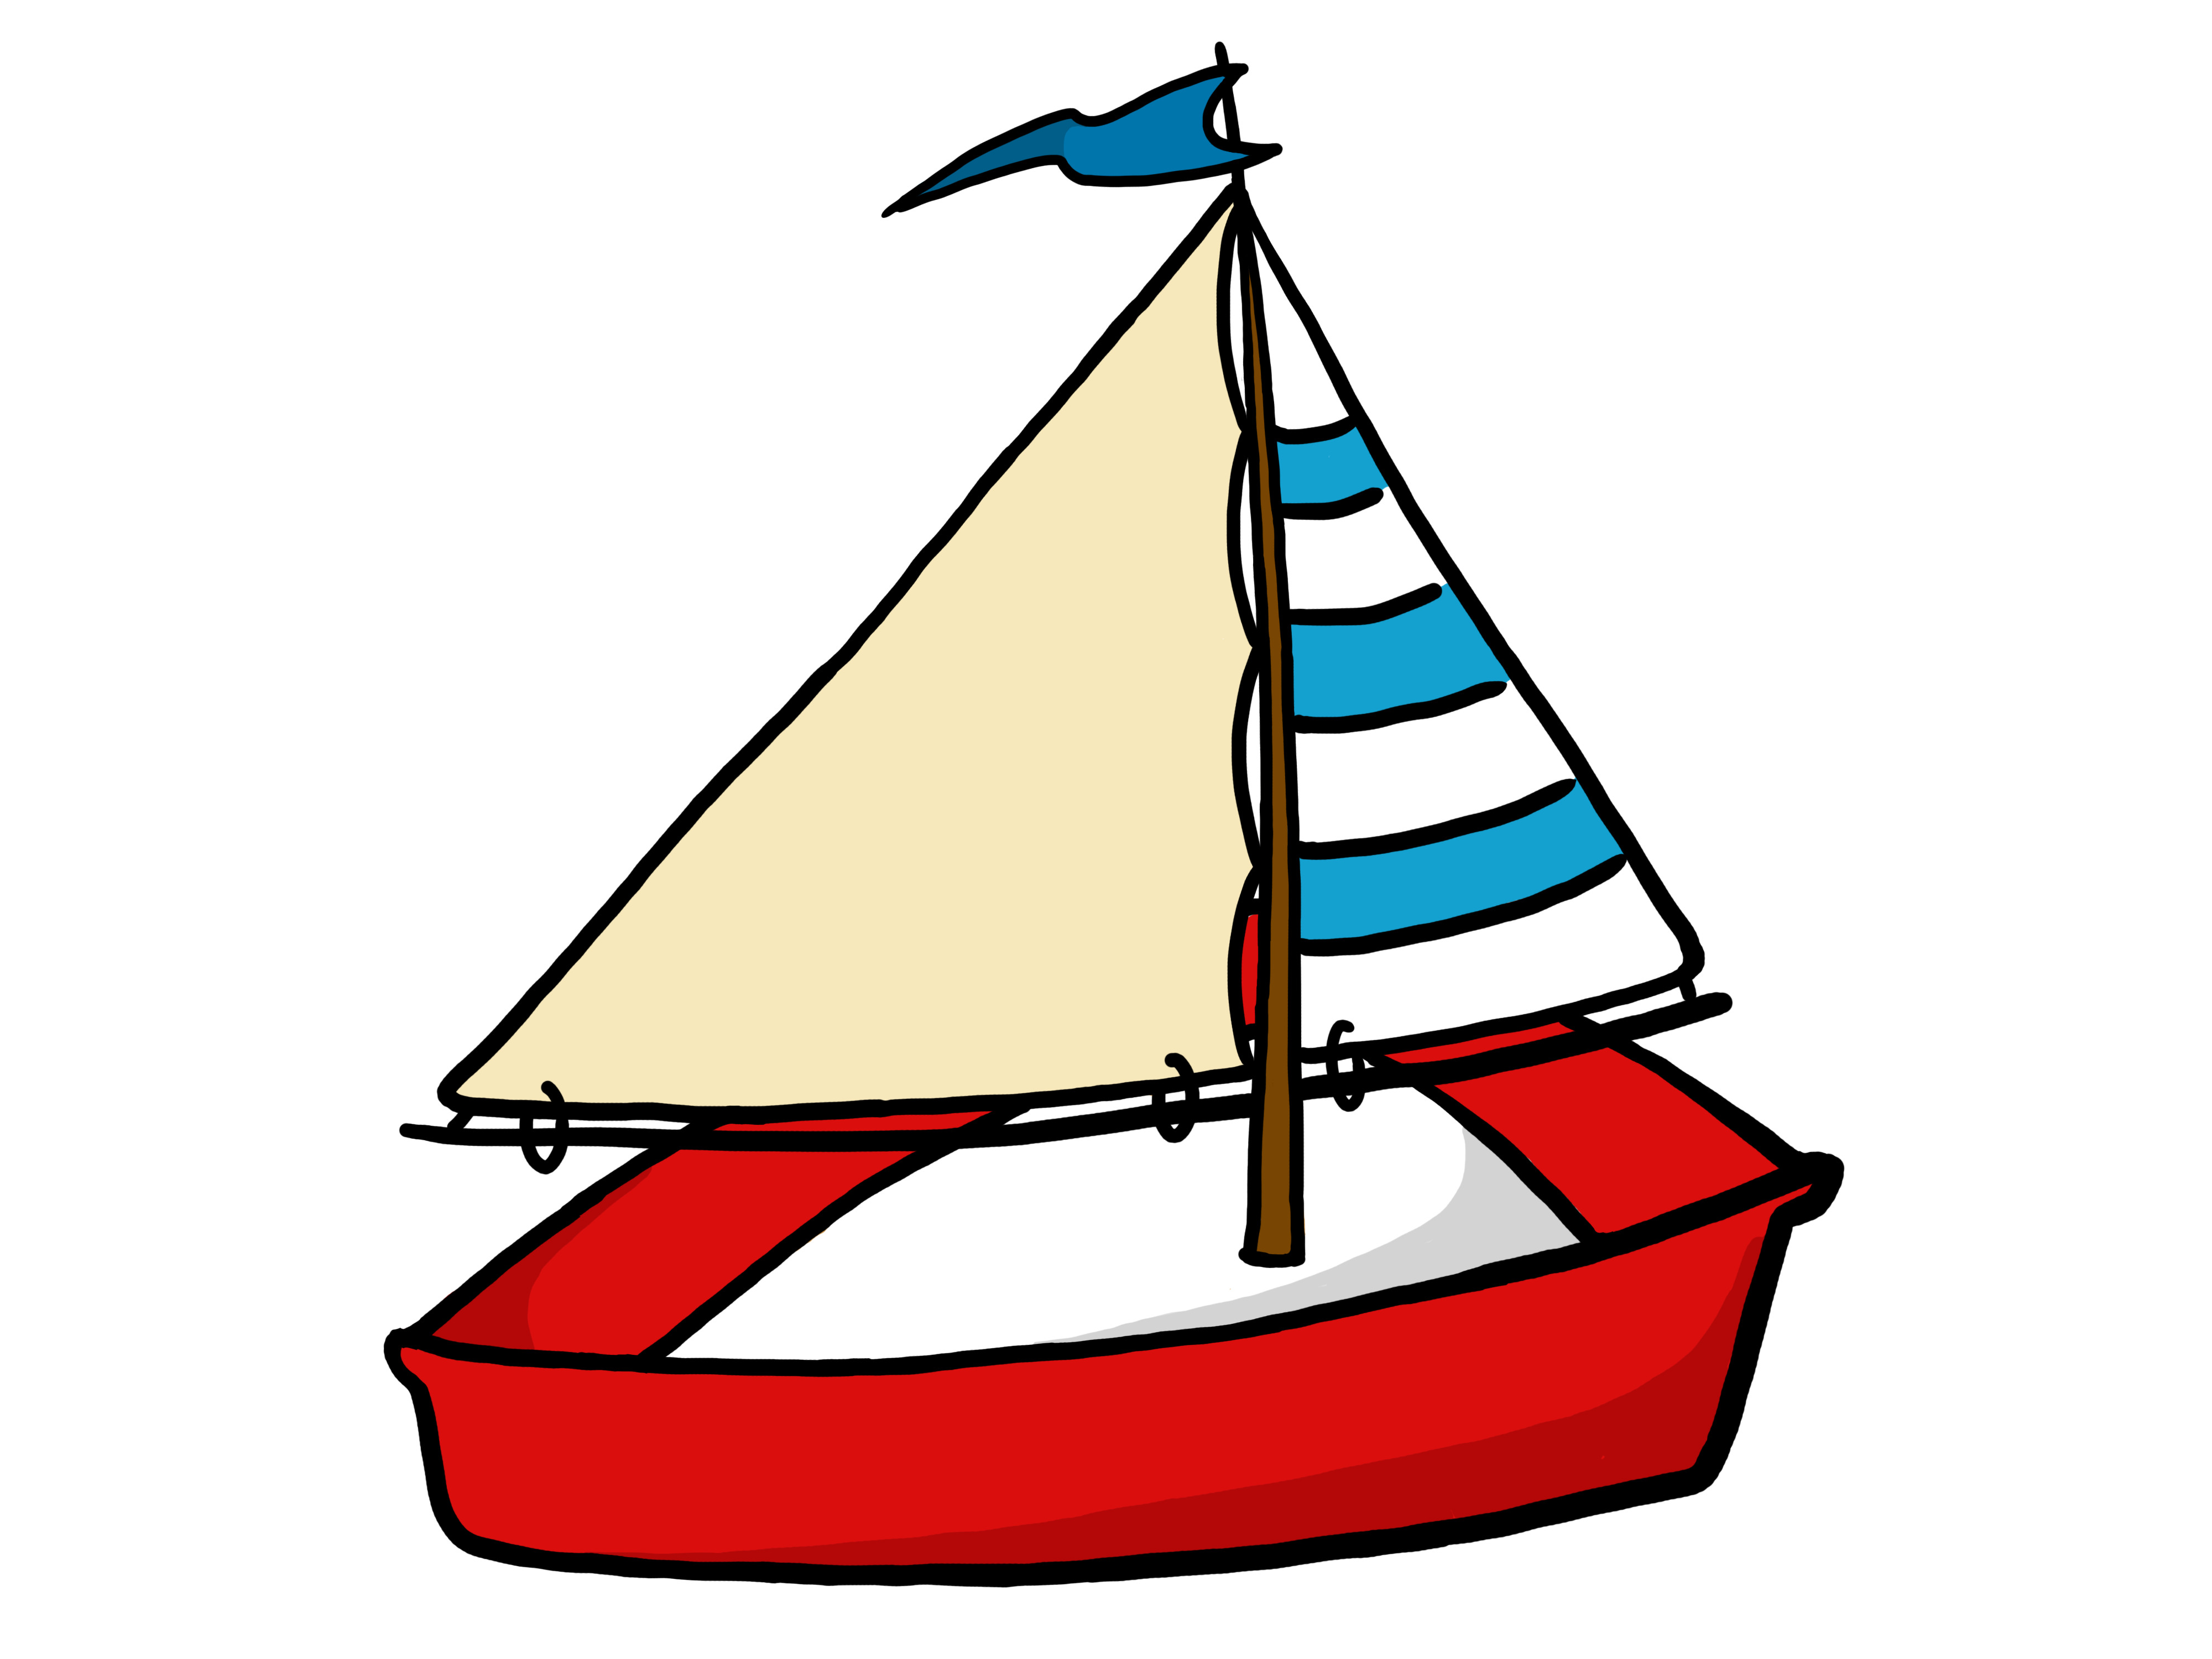 Pennant clipart boat flag. Boating panda free images